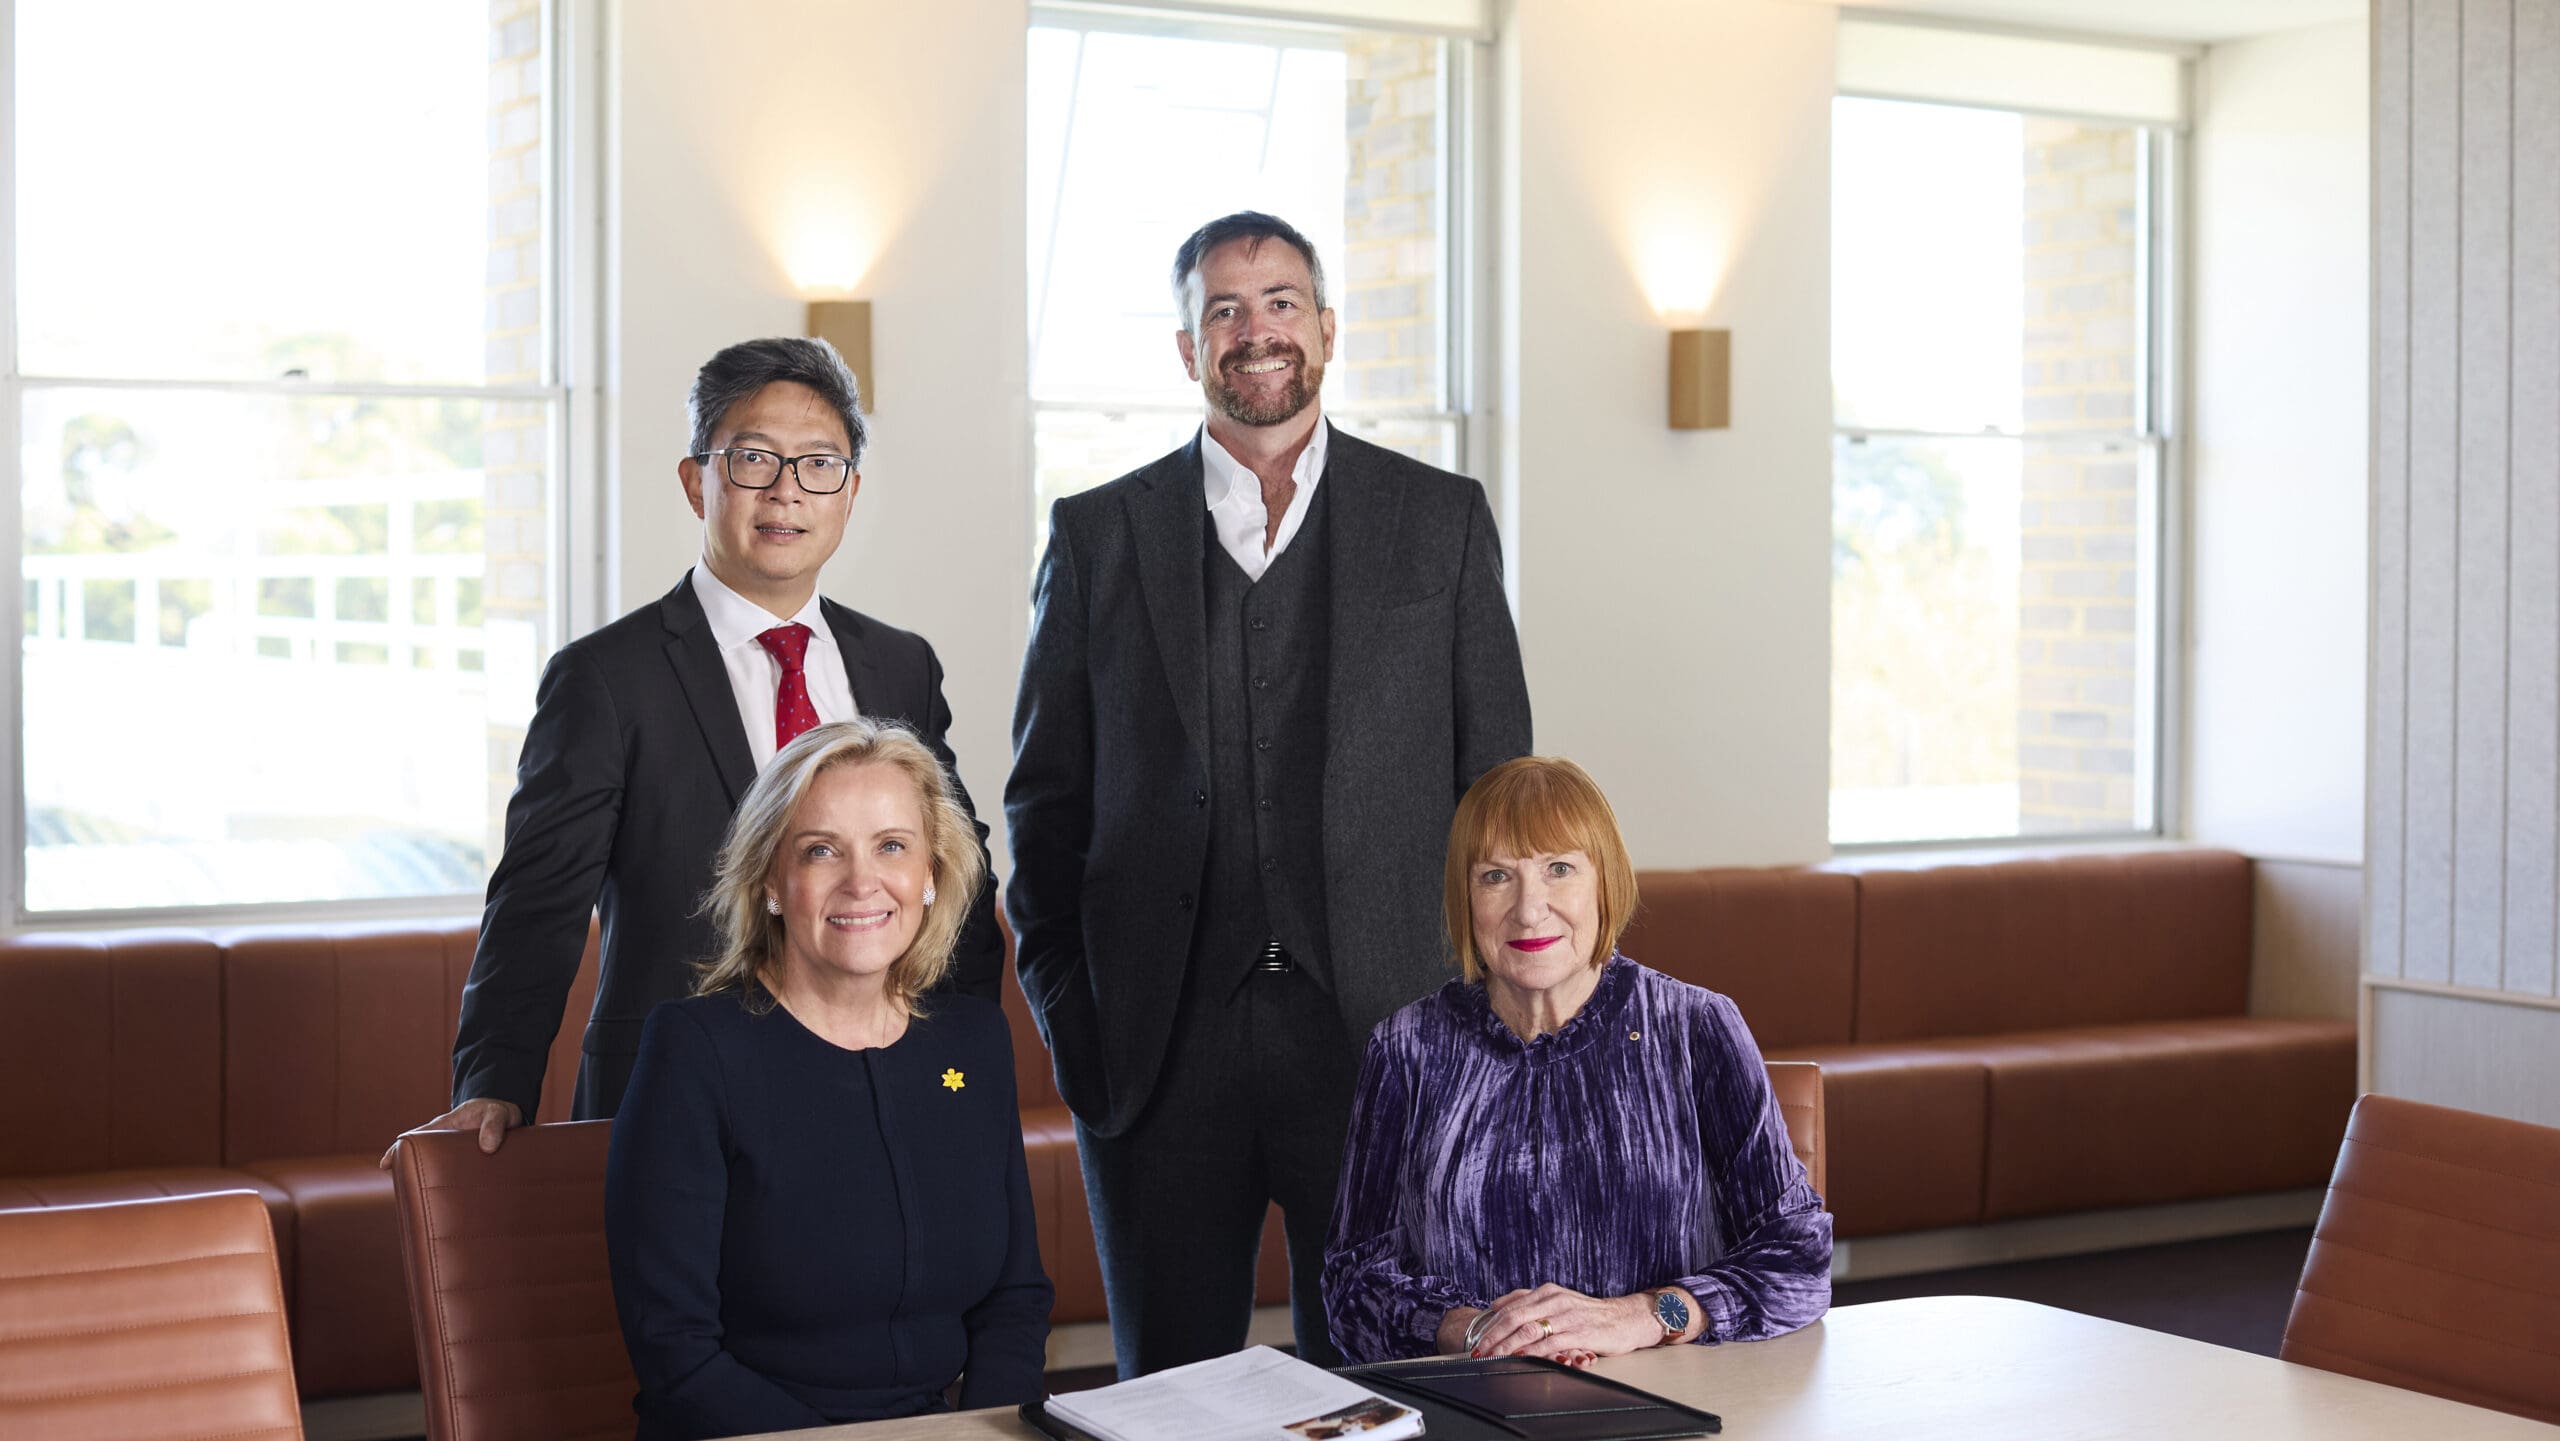 In this photo, we have Professor Elgene Lim, Cancer theme lead at UNSW Medicine & Health, and UNSW Vice-Chancellor and President Professor Attila Brungs in the back row, and Cancer Council NSW CEO Professor Sarah Hosking and cancer survivor Ainslie Cahill AM in the front.